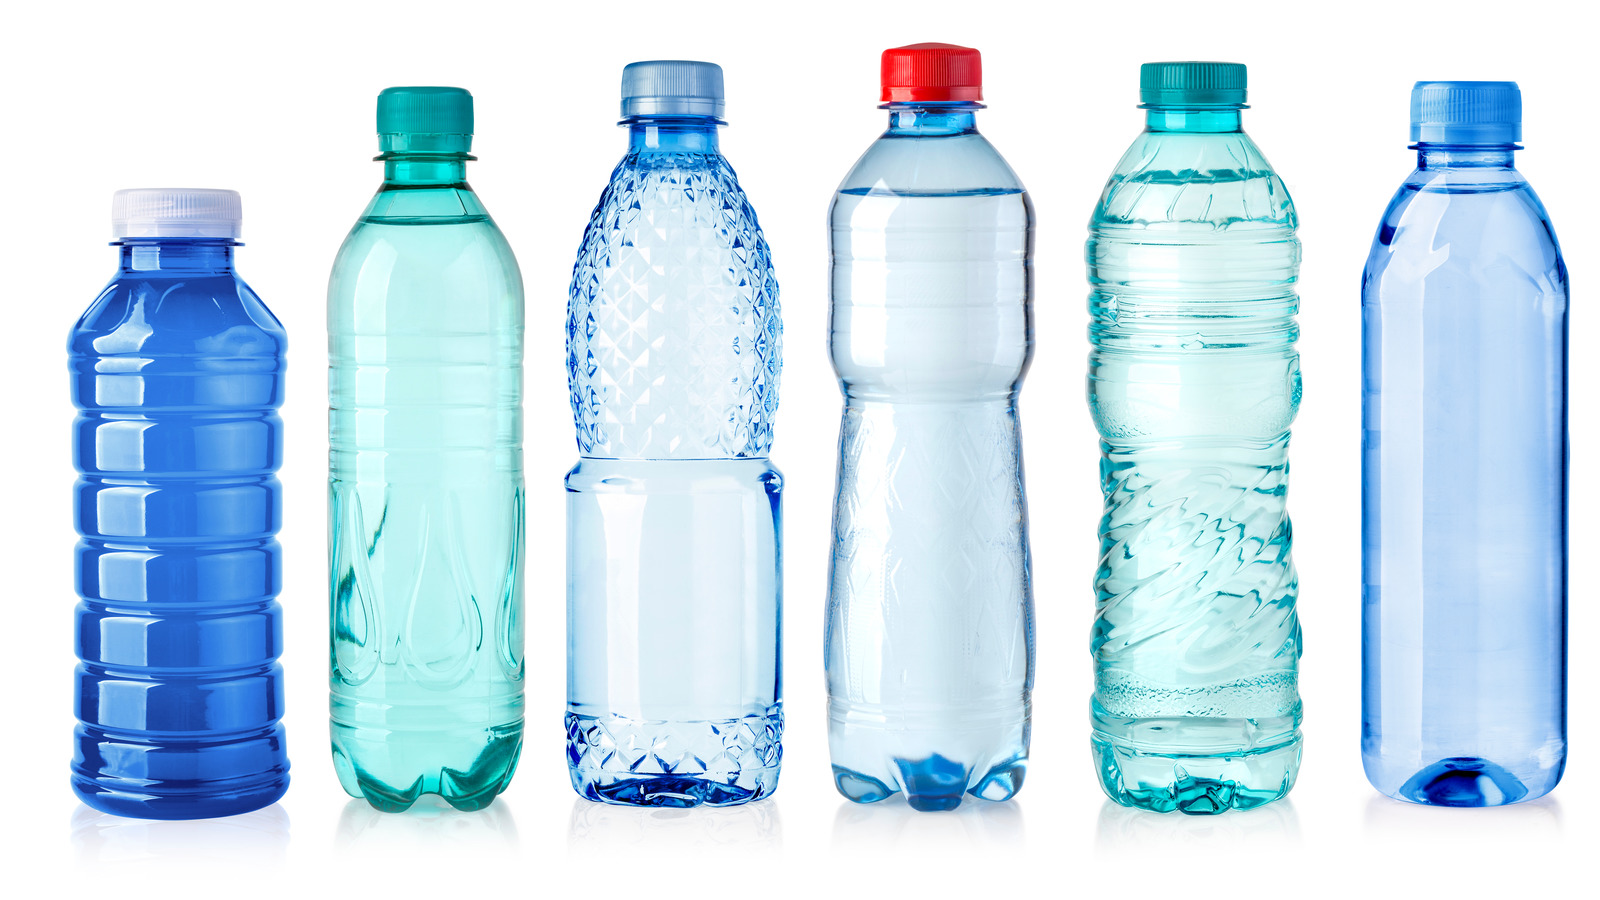 https://www.healthdigest.com/img/gallery/think-twice-before-reusing-a-plastic-water-bottle-heres-why/l-intro-1606837860.jpg